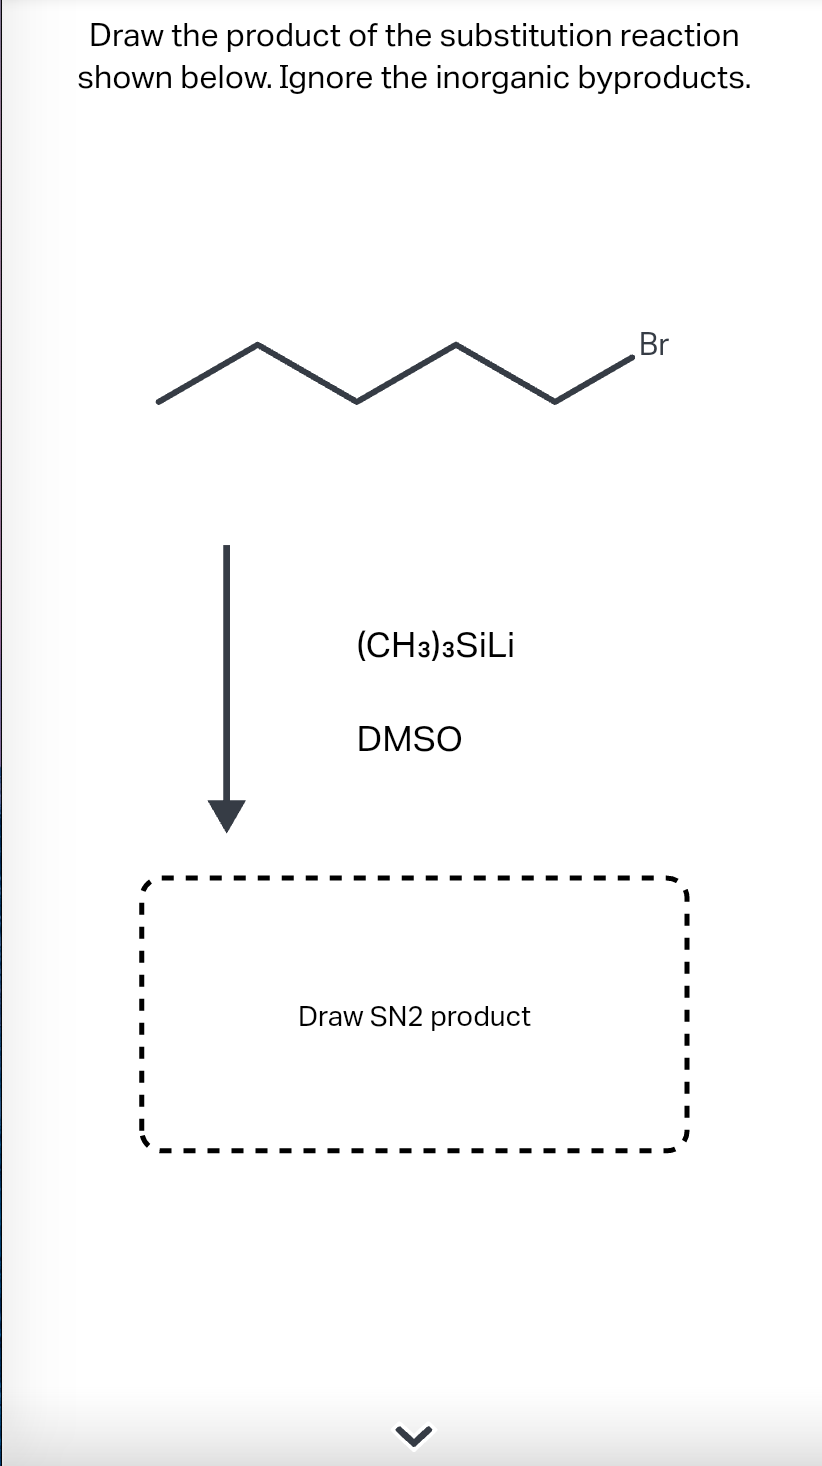 Draw the product of the substitution reaction
shown below. Ignore the inorganic byproducts.
(CH3)3 SiLi
DMSO
Draw SN2 product
Br